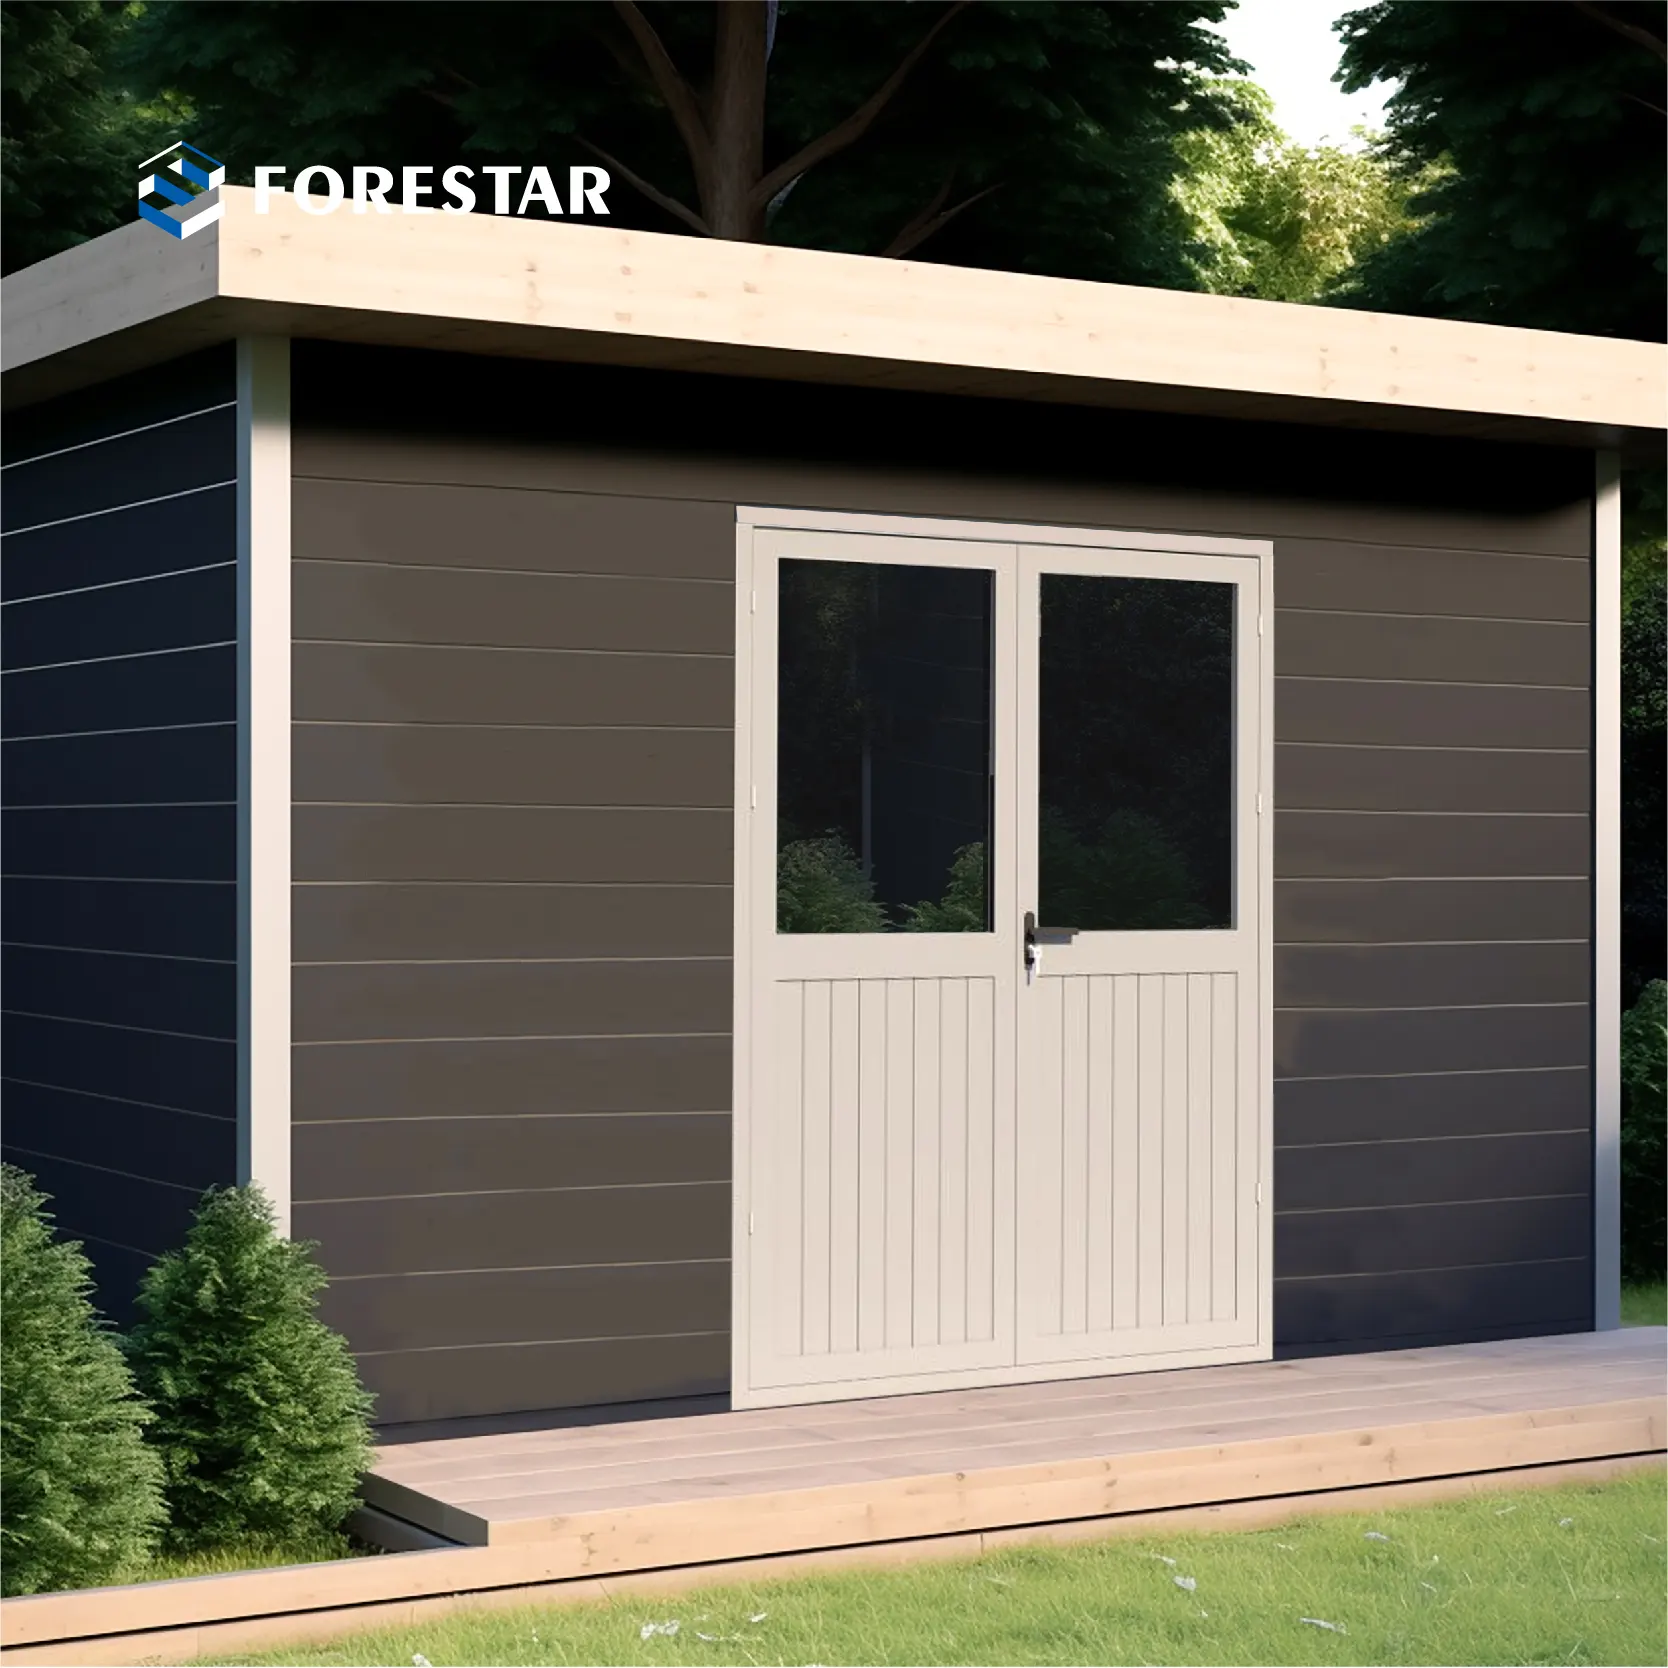 D2833 3M*3M High Performance Metal Tools Storage Shed Green Waterproof Steel Wood Home Garden Shed sheds storage outdoor